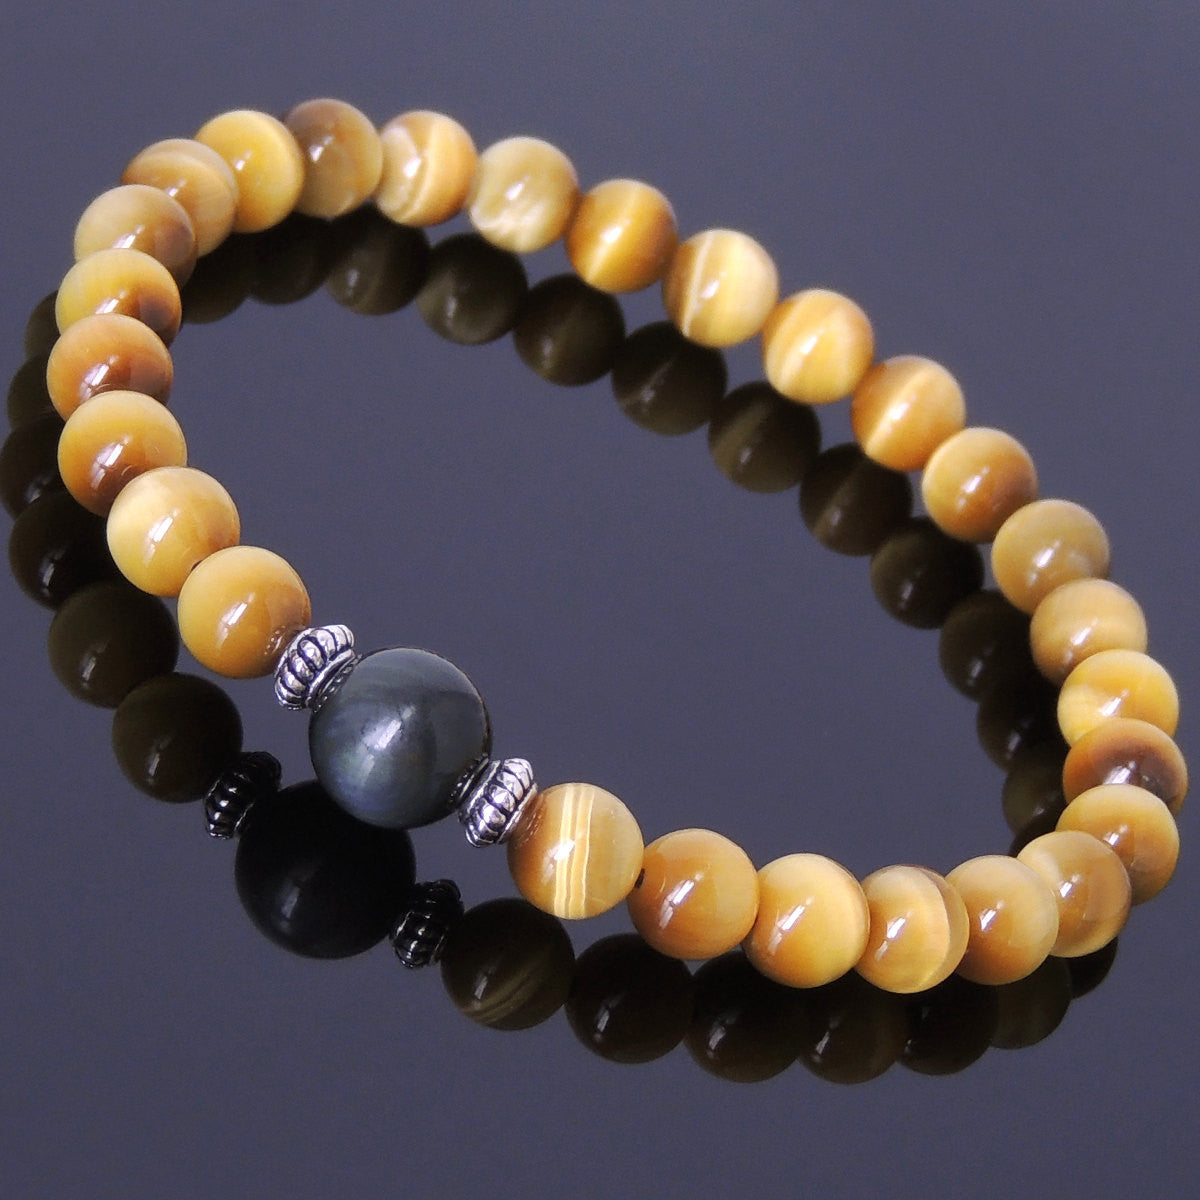 Meditation Chakra Healing Protection Crystals Tai Chi Golden Tiger Eye & Rainbow Black Obsidian Healing Gemstone Bracelet with S925 Sterling Silver Spacer Beads - Handmade by Gem & Silver BR413